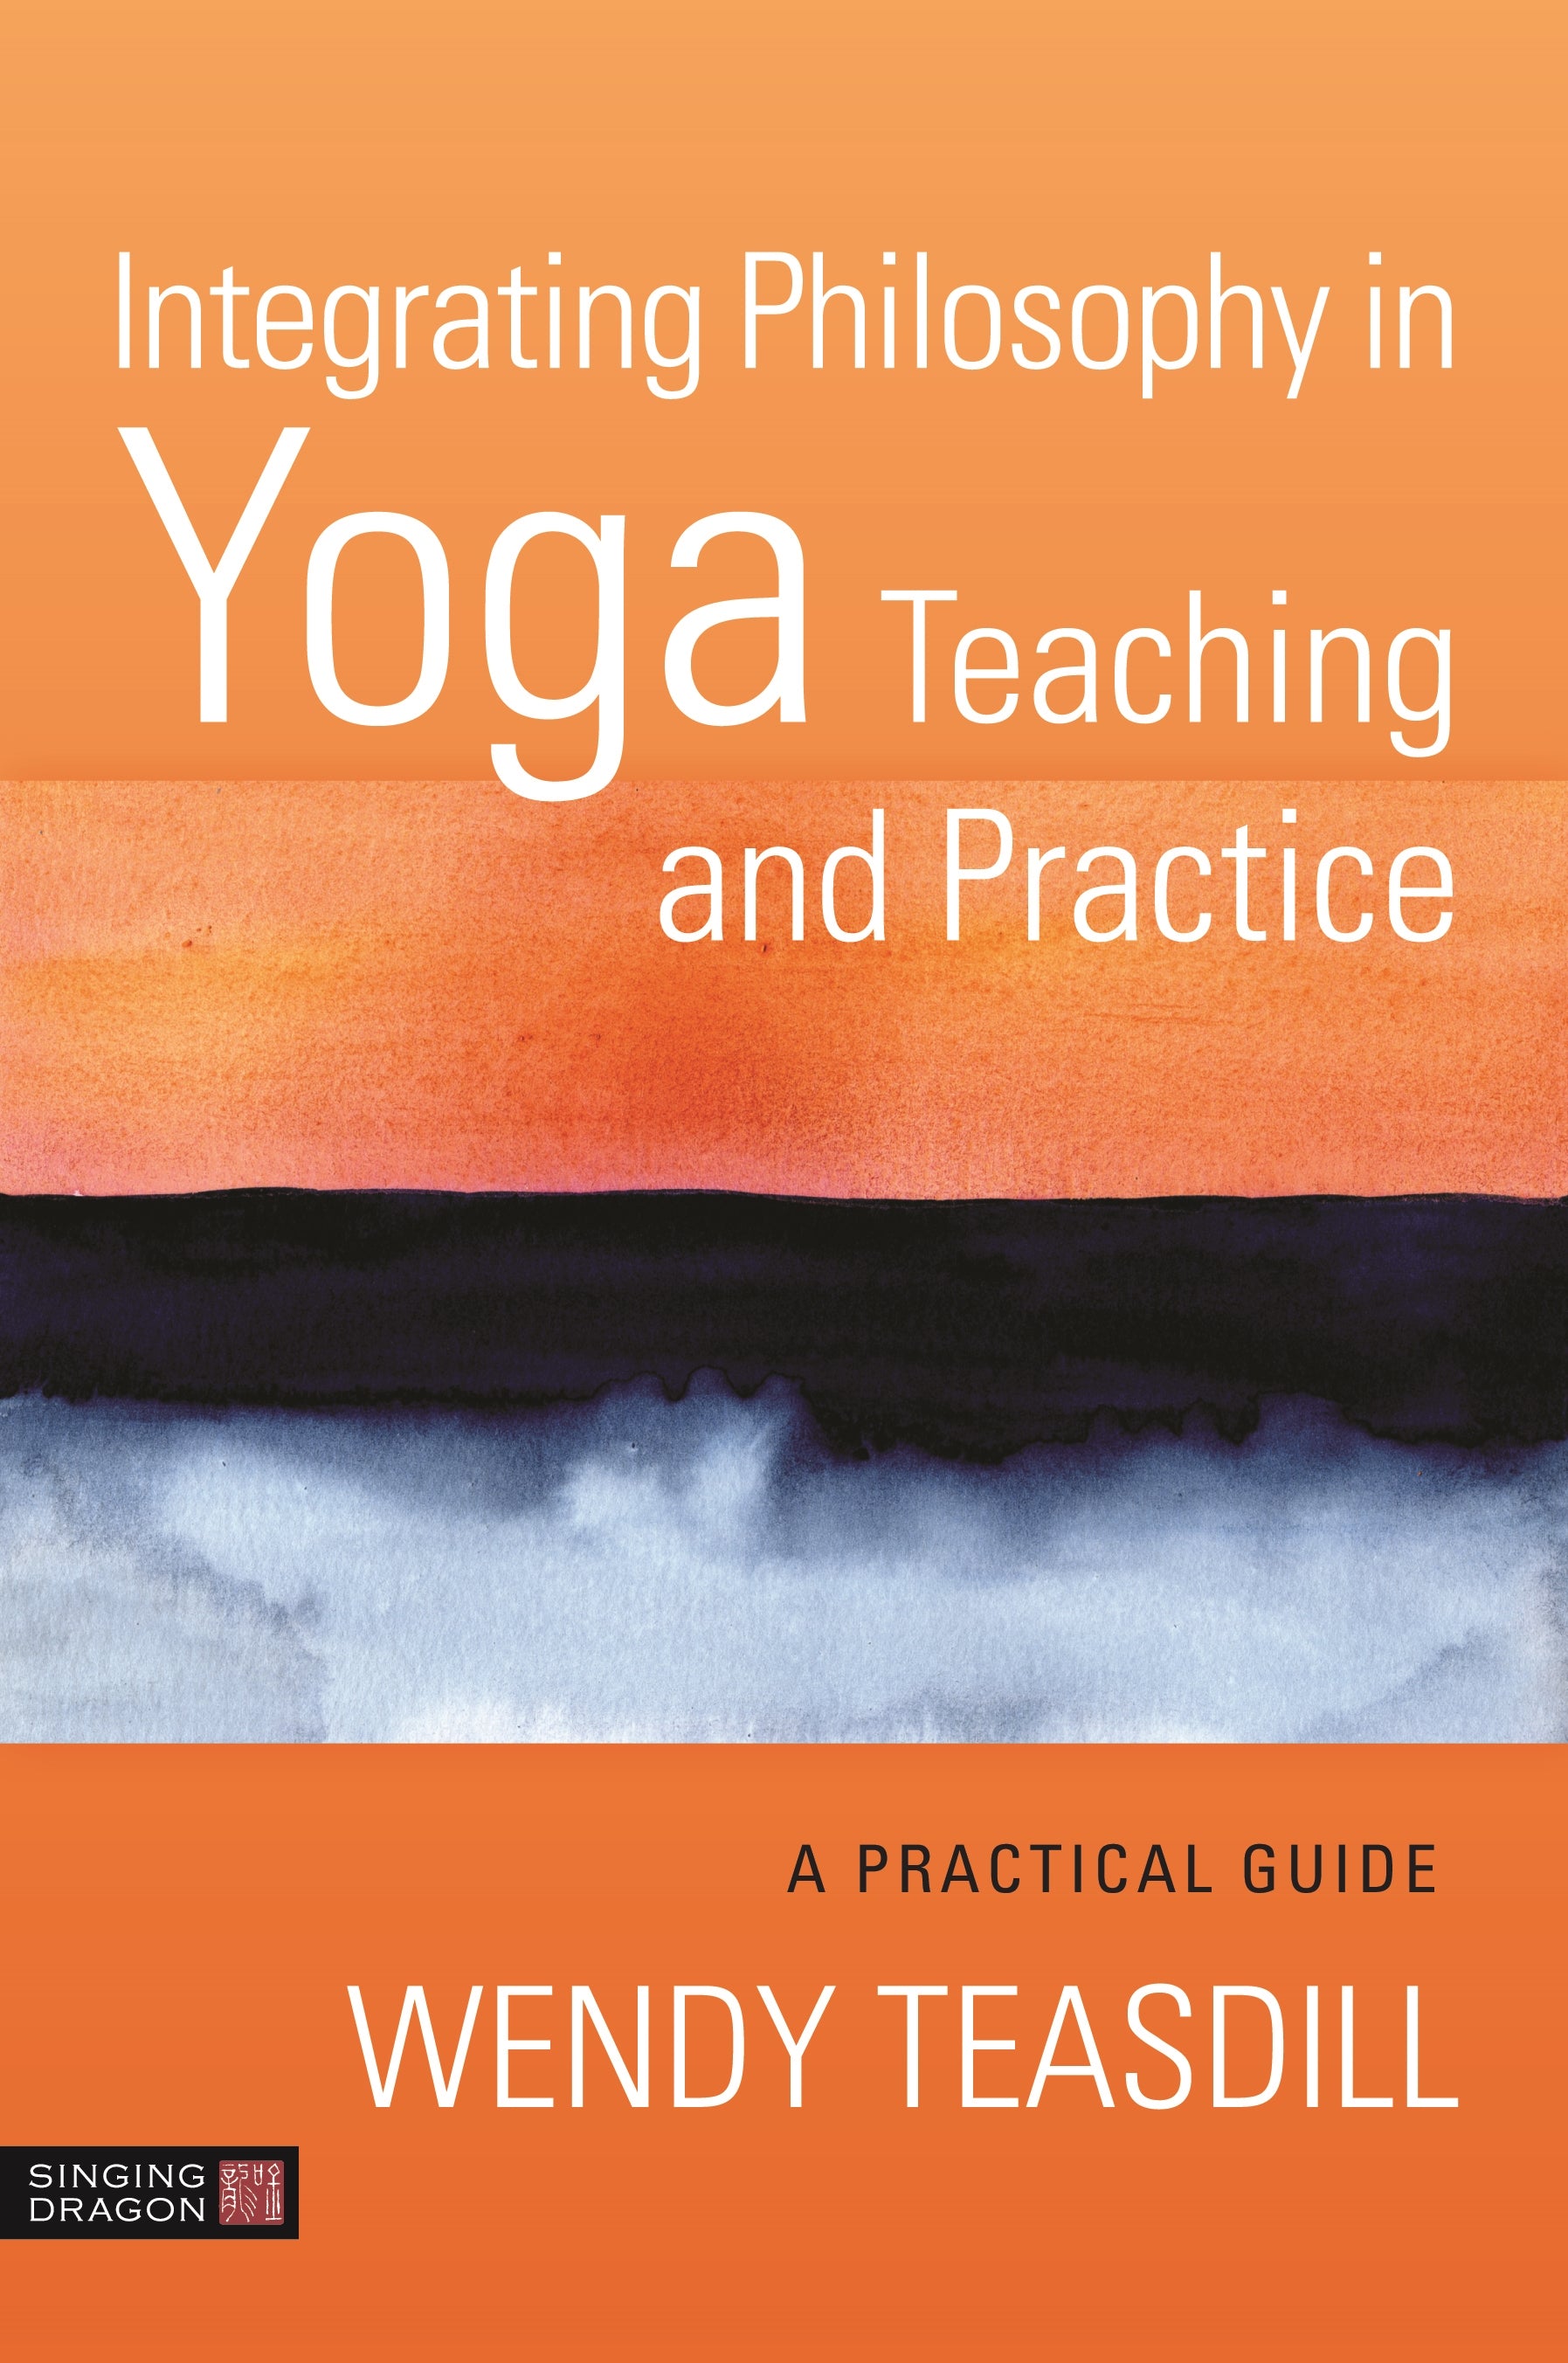 Integrating Philosophy in Yoga Teaching and Practice by Wendy Teasdill